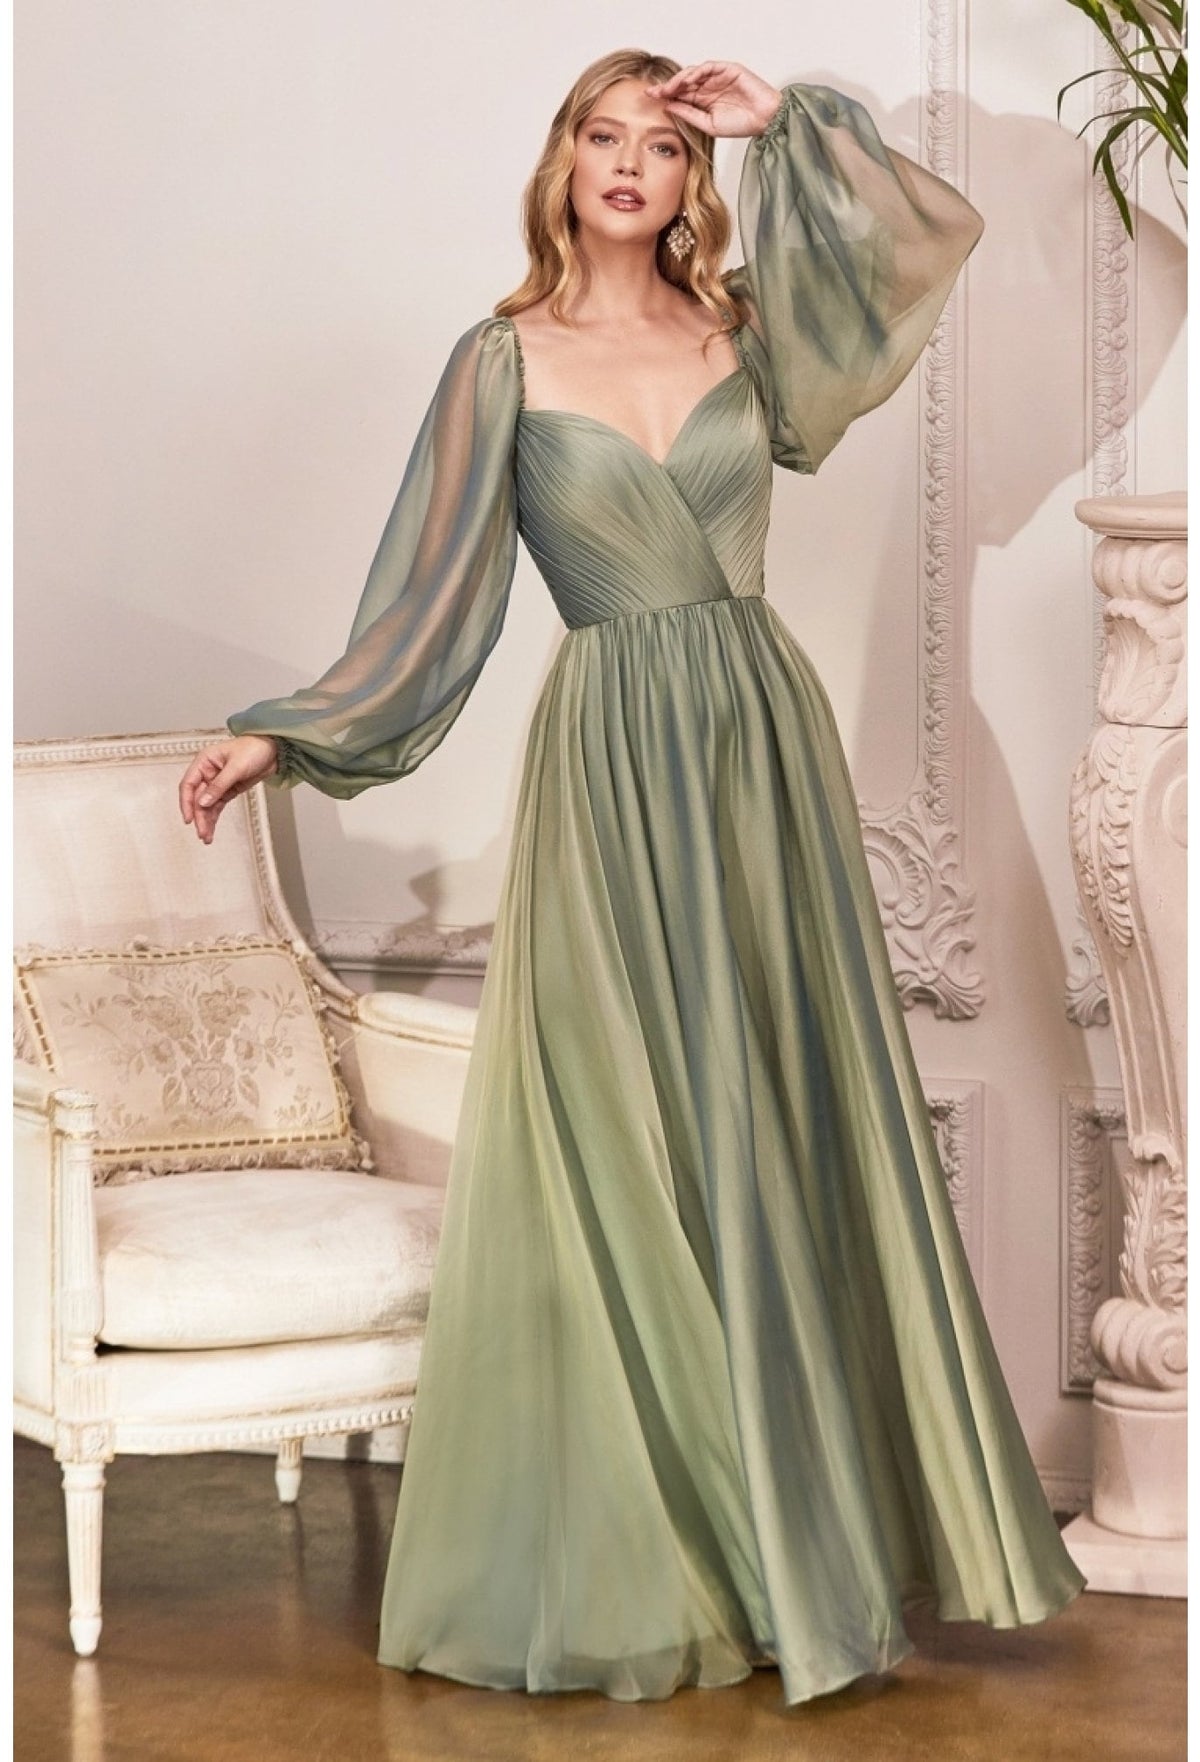 Beautiful Unique Jewel Tone Long Sleeve Chiffon Aline Dress Off the Shoulder Sweetheart Neckline Prom Formal Gown Bridesmaid Dress